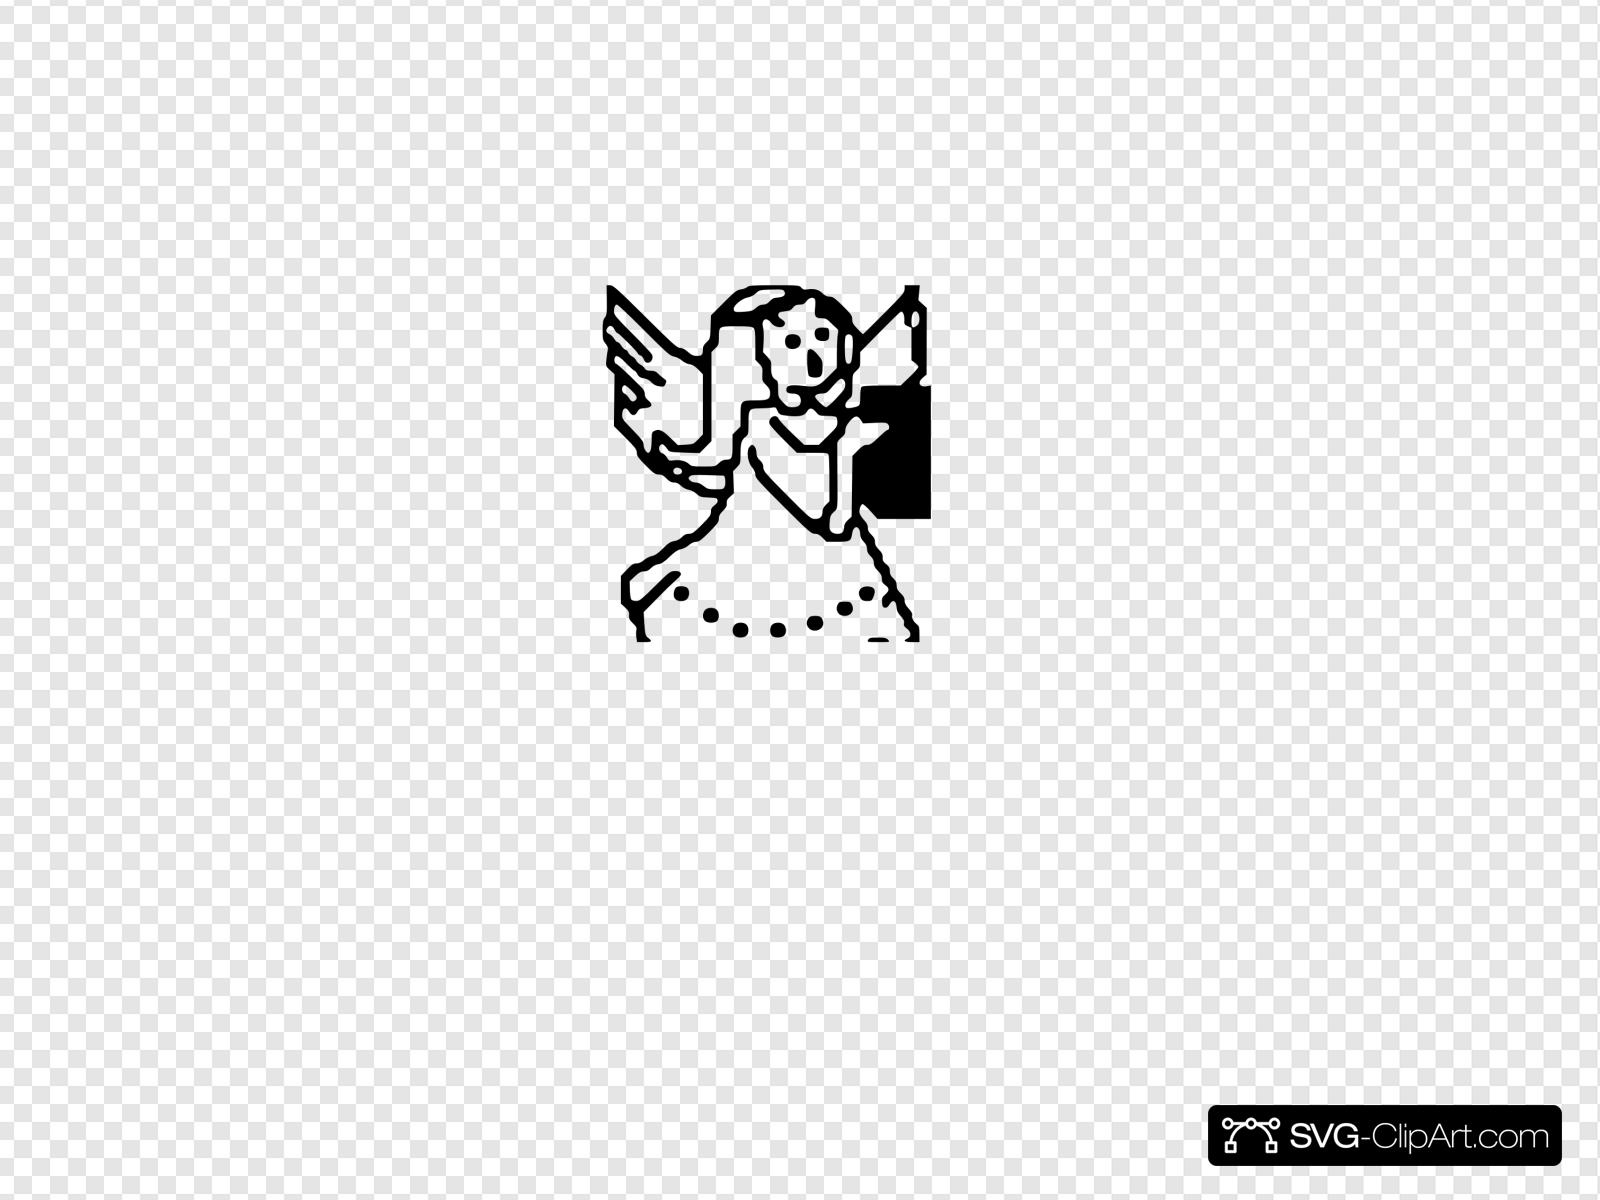 Small Angel Clip art, Icon and SVG.